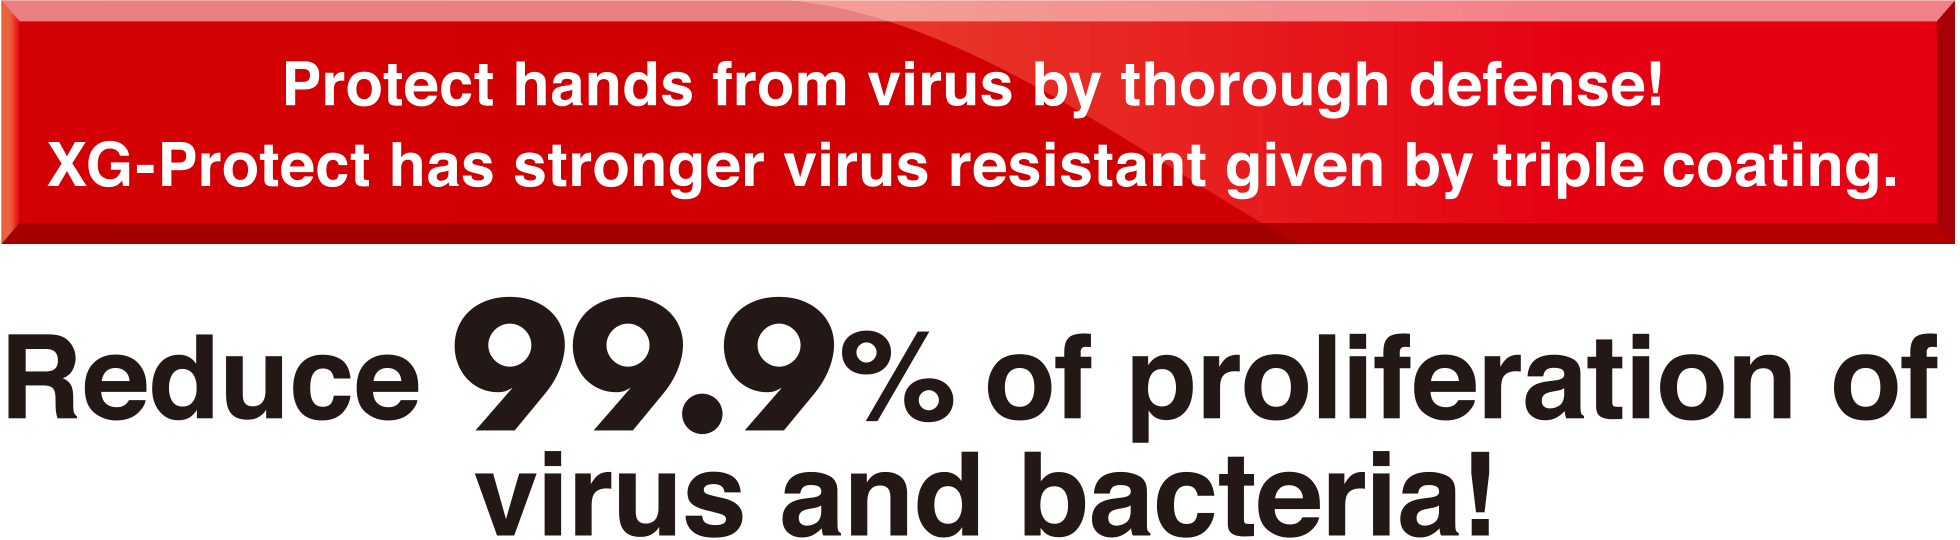 Protect hands from virus by thorough defense! XG-Protect has stronger virus resistant given by triple coating.